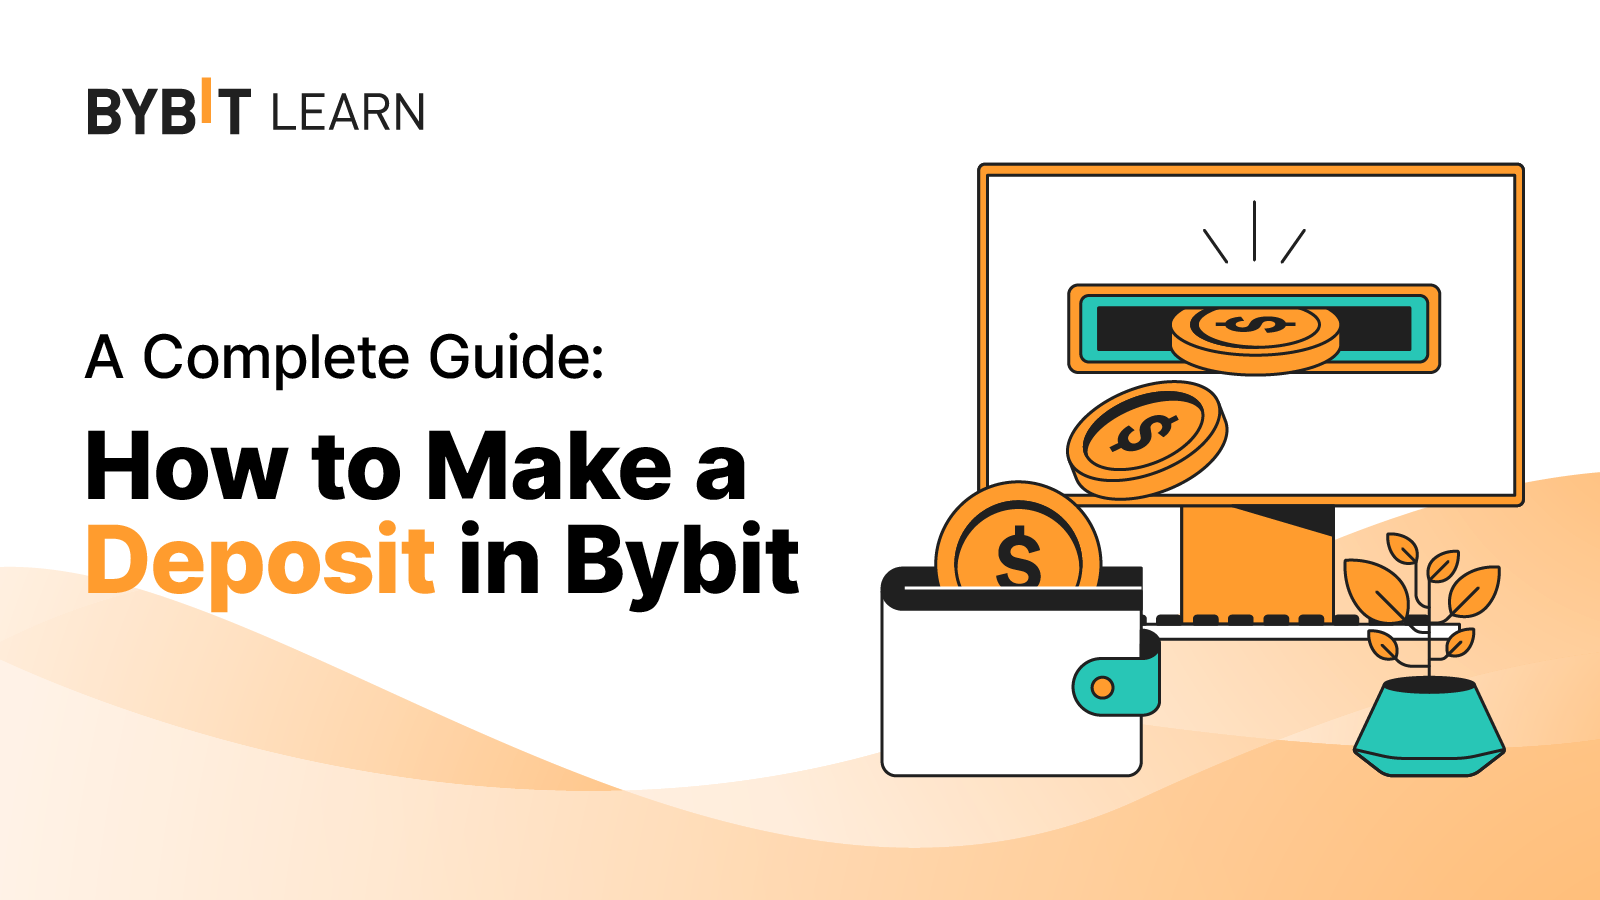 2305-T3599_How_to_Make_a_Deposit_in_Bybit_A_Complete_Guide_1600x900.png